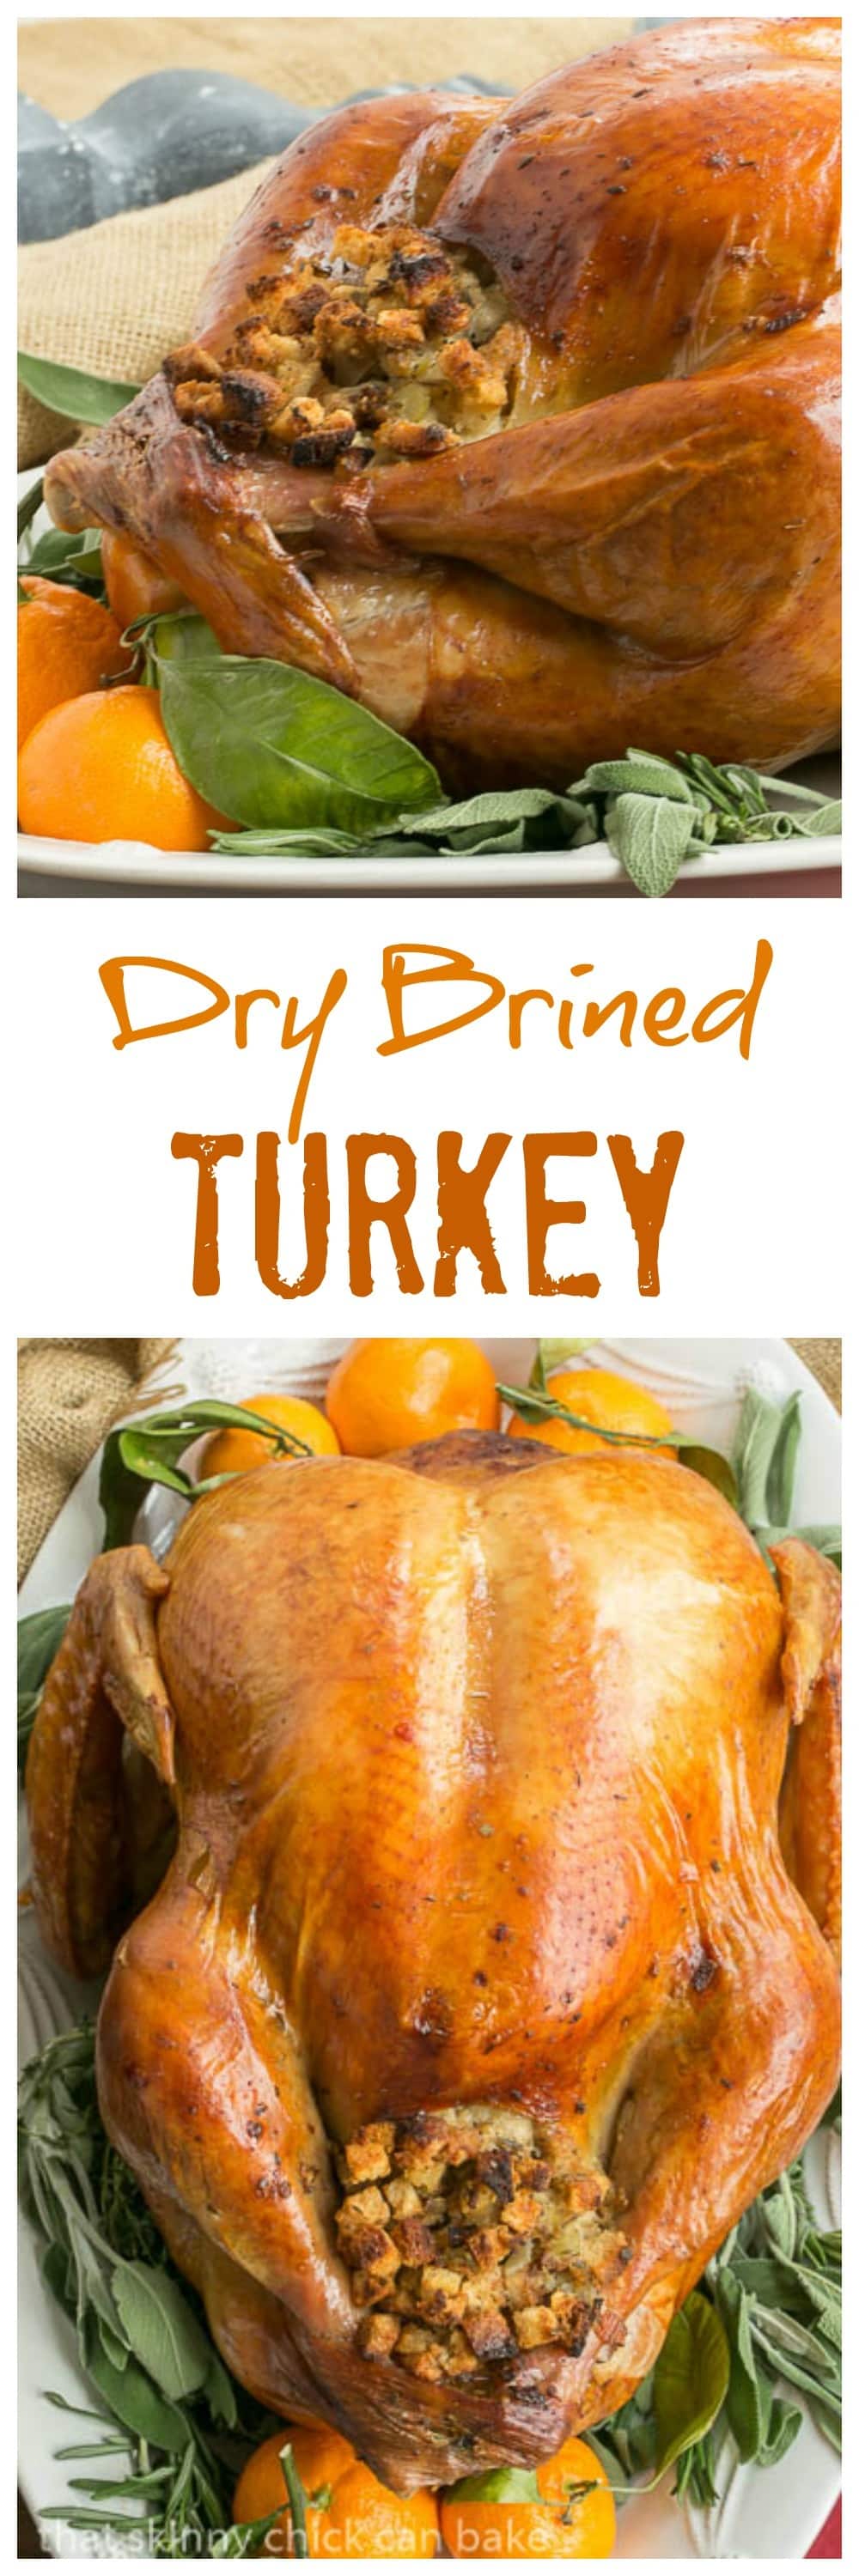 Dry Brined Turkey - That Skinny Chick Can Bake